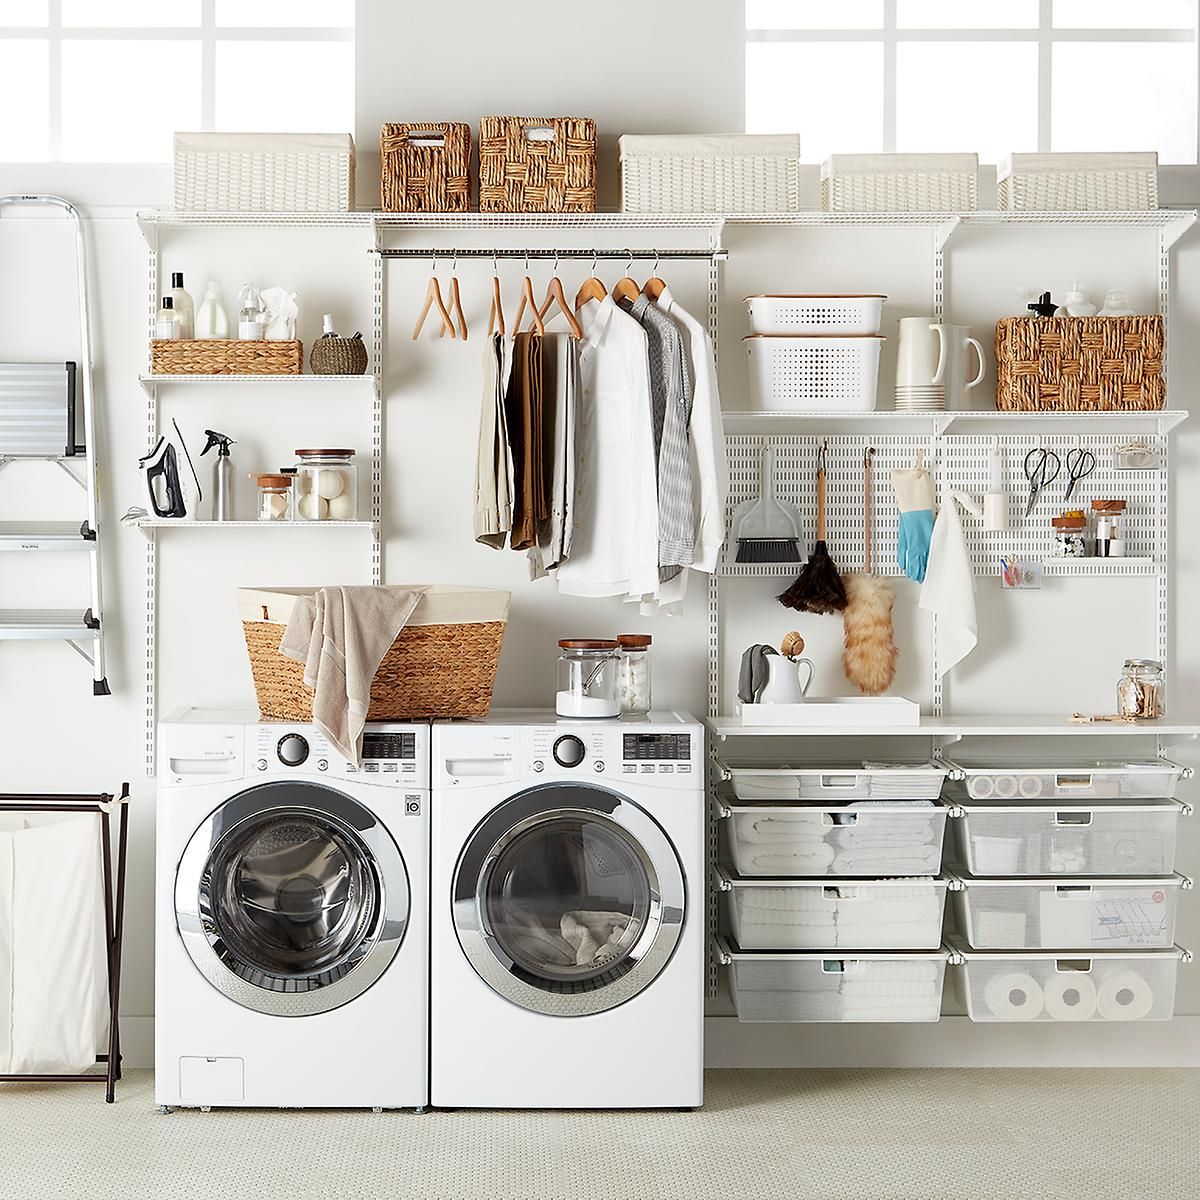 10 laundry room organization strategies that actually work